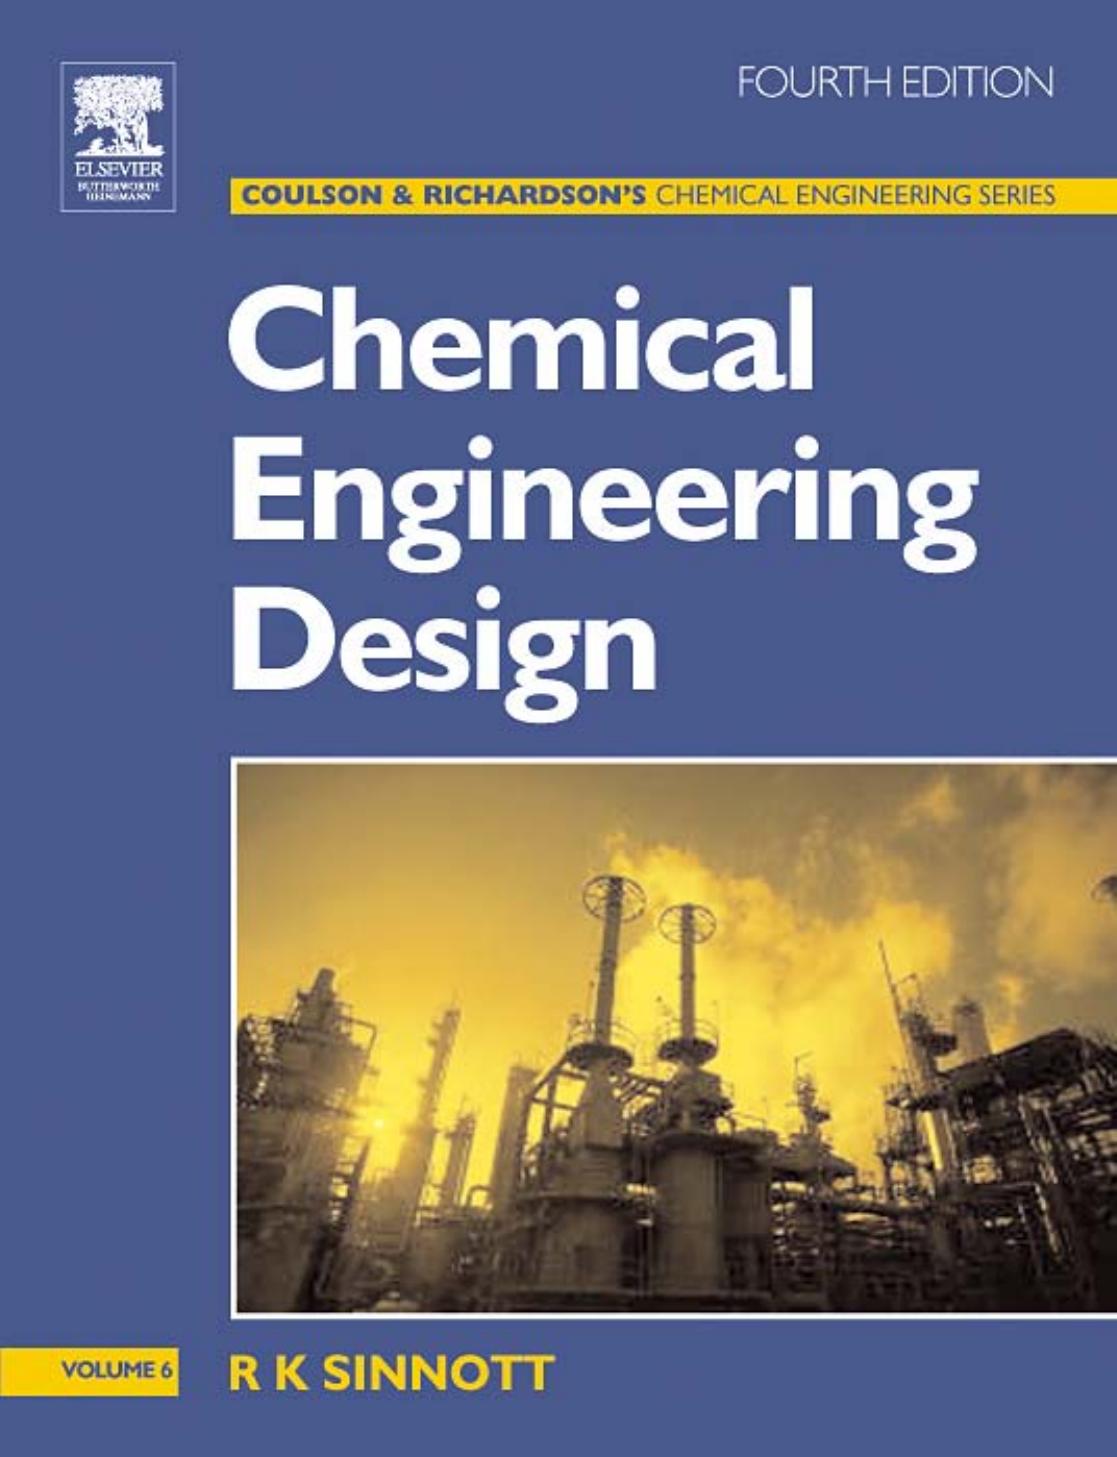 Coulson & Richardson's Chemical Engineering. Vol. 6, Chemical Engineering Design, 4th Ed 2005